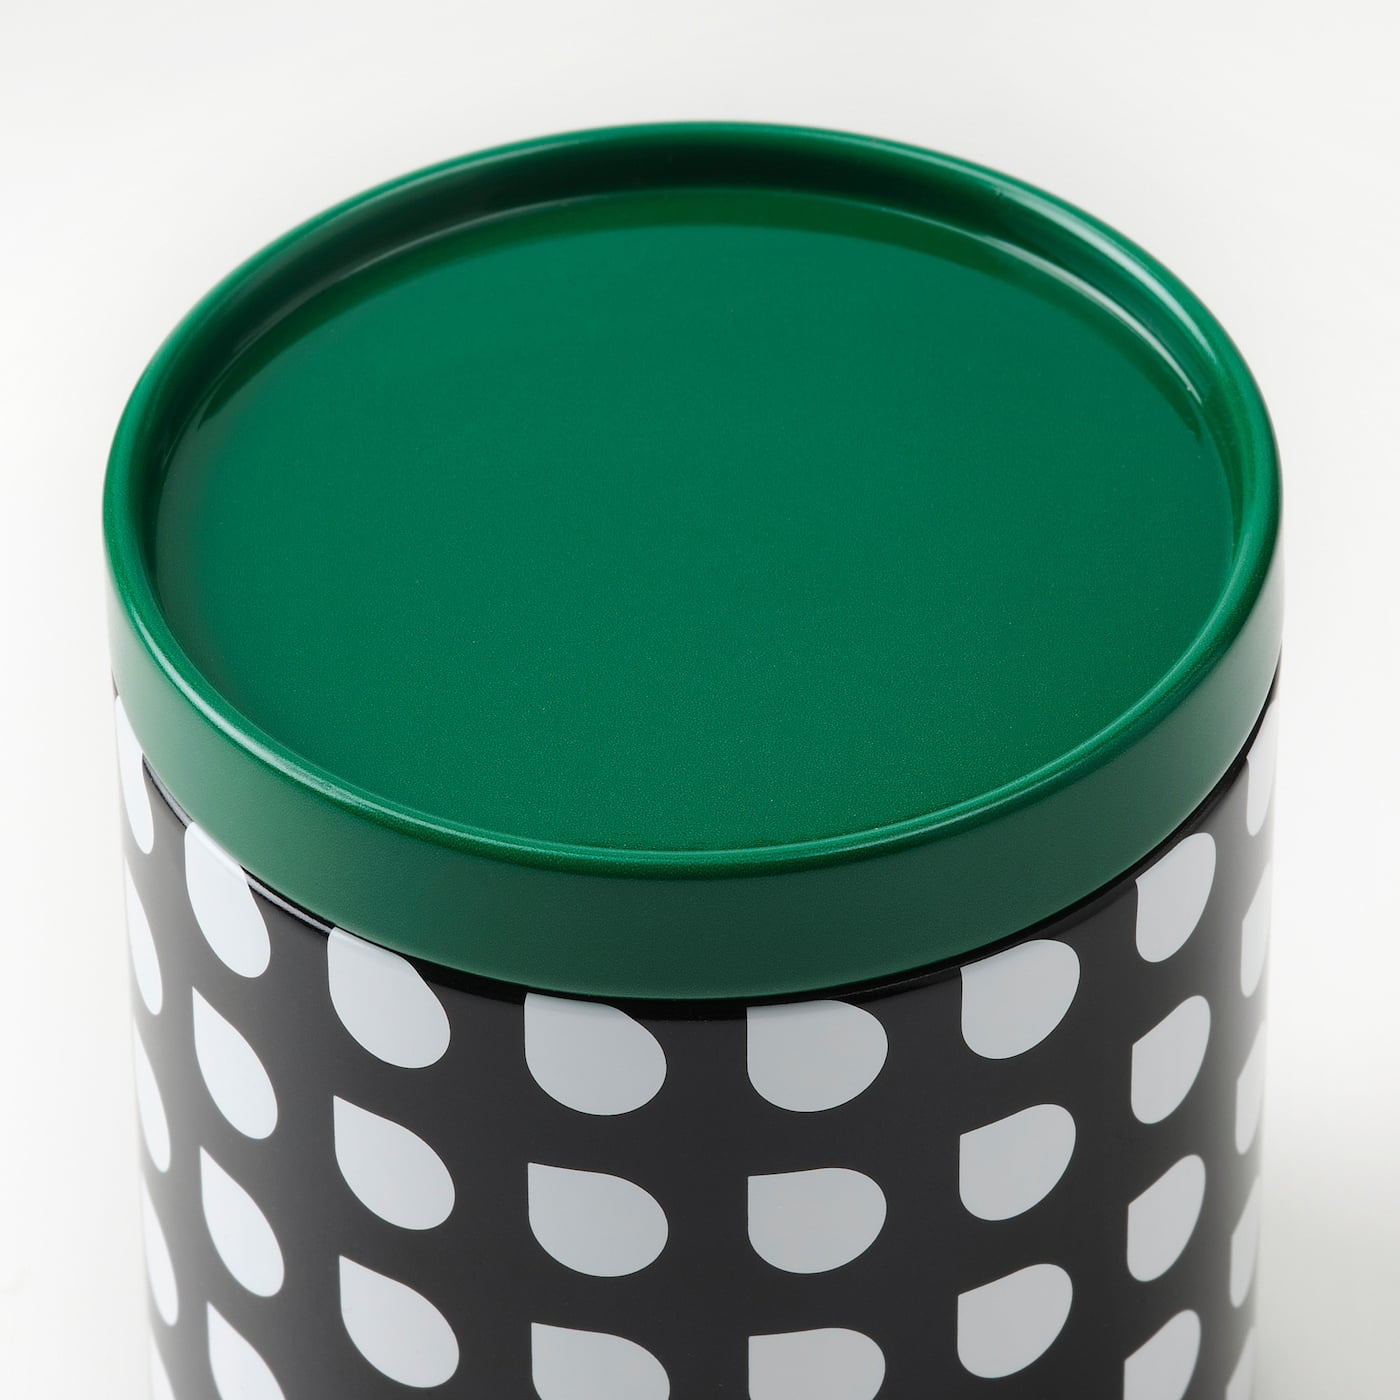 pluggland-storage-tin-with-lid-set-of-3-mixed-patterns__1075464_pe856622_s5